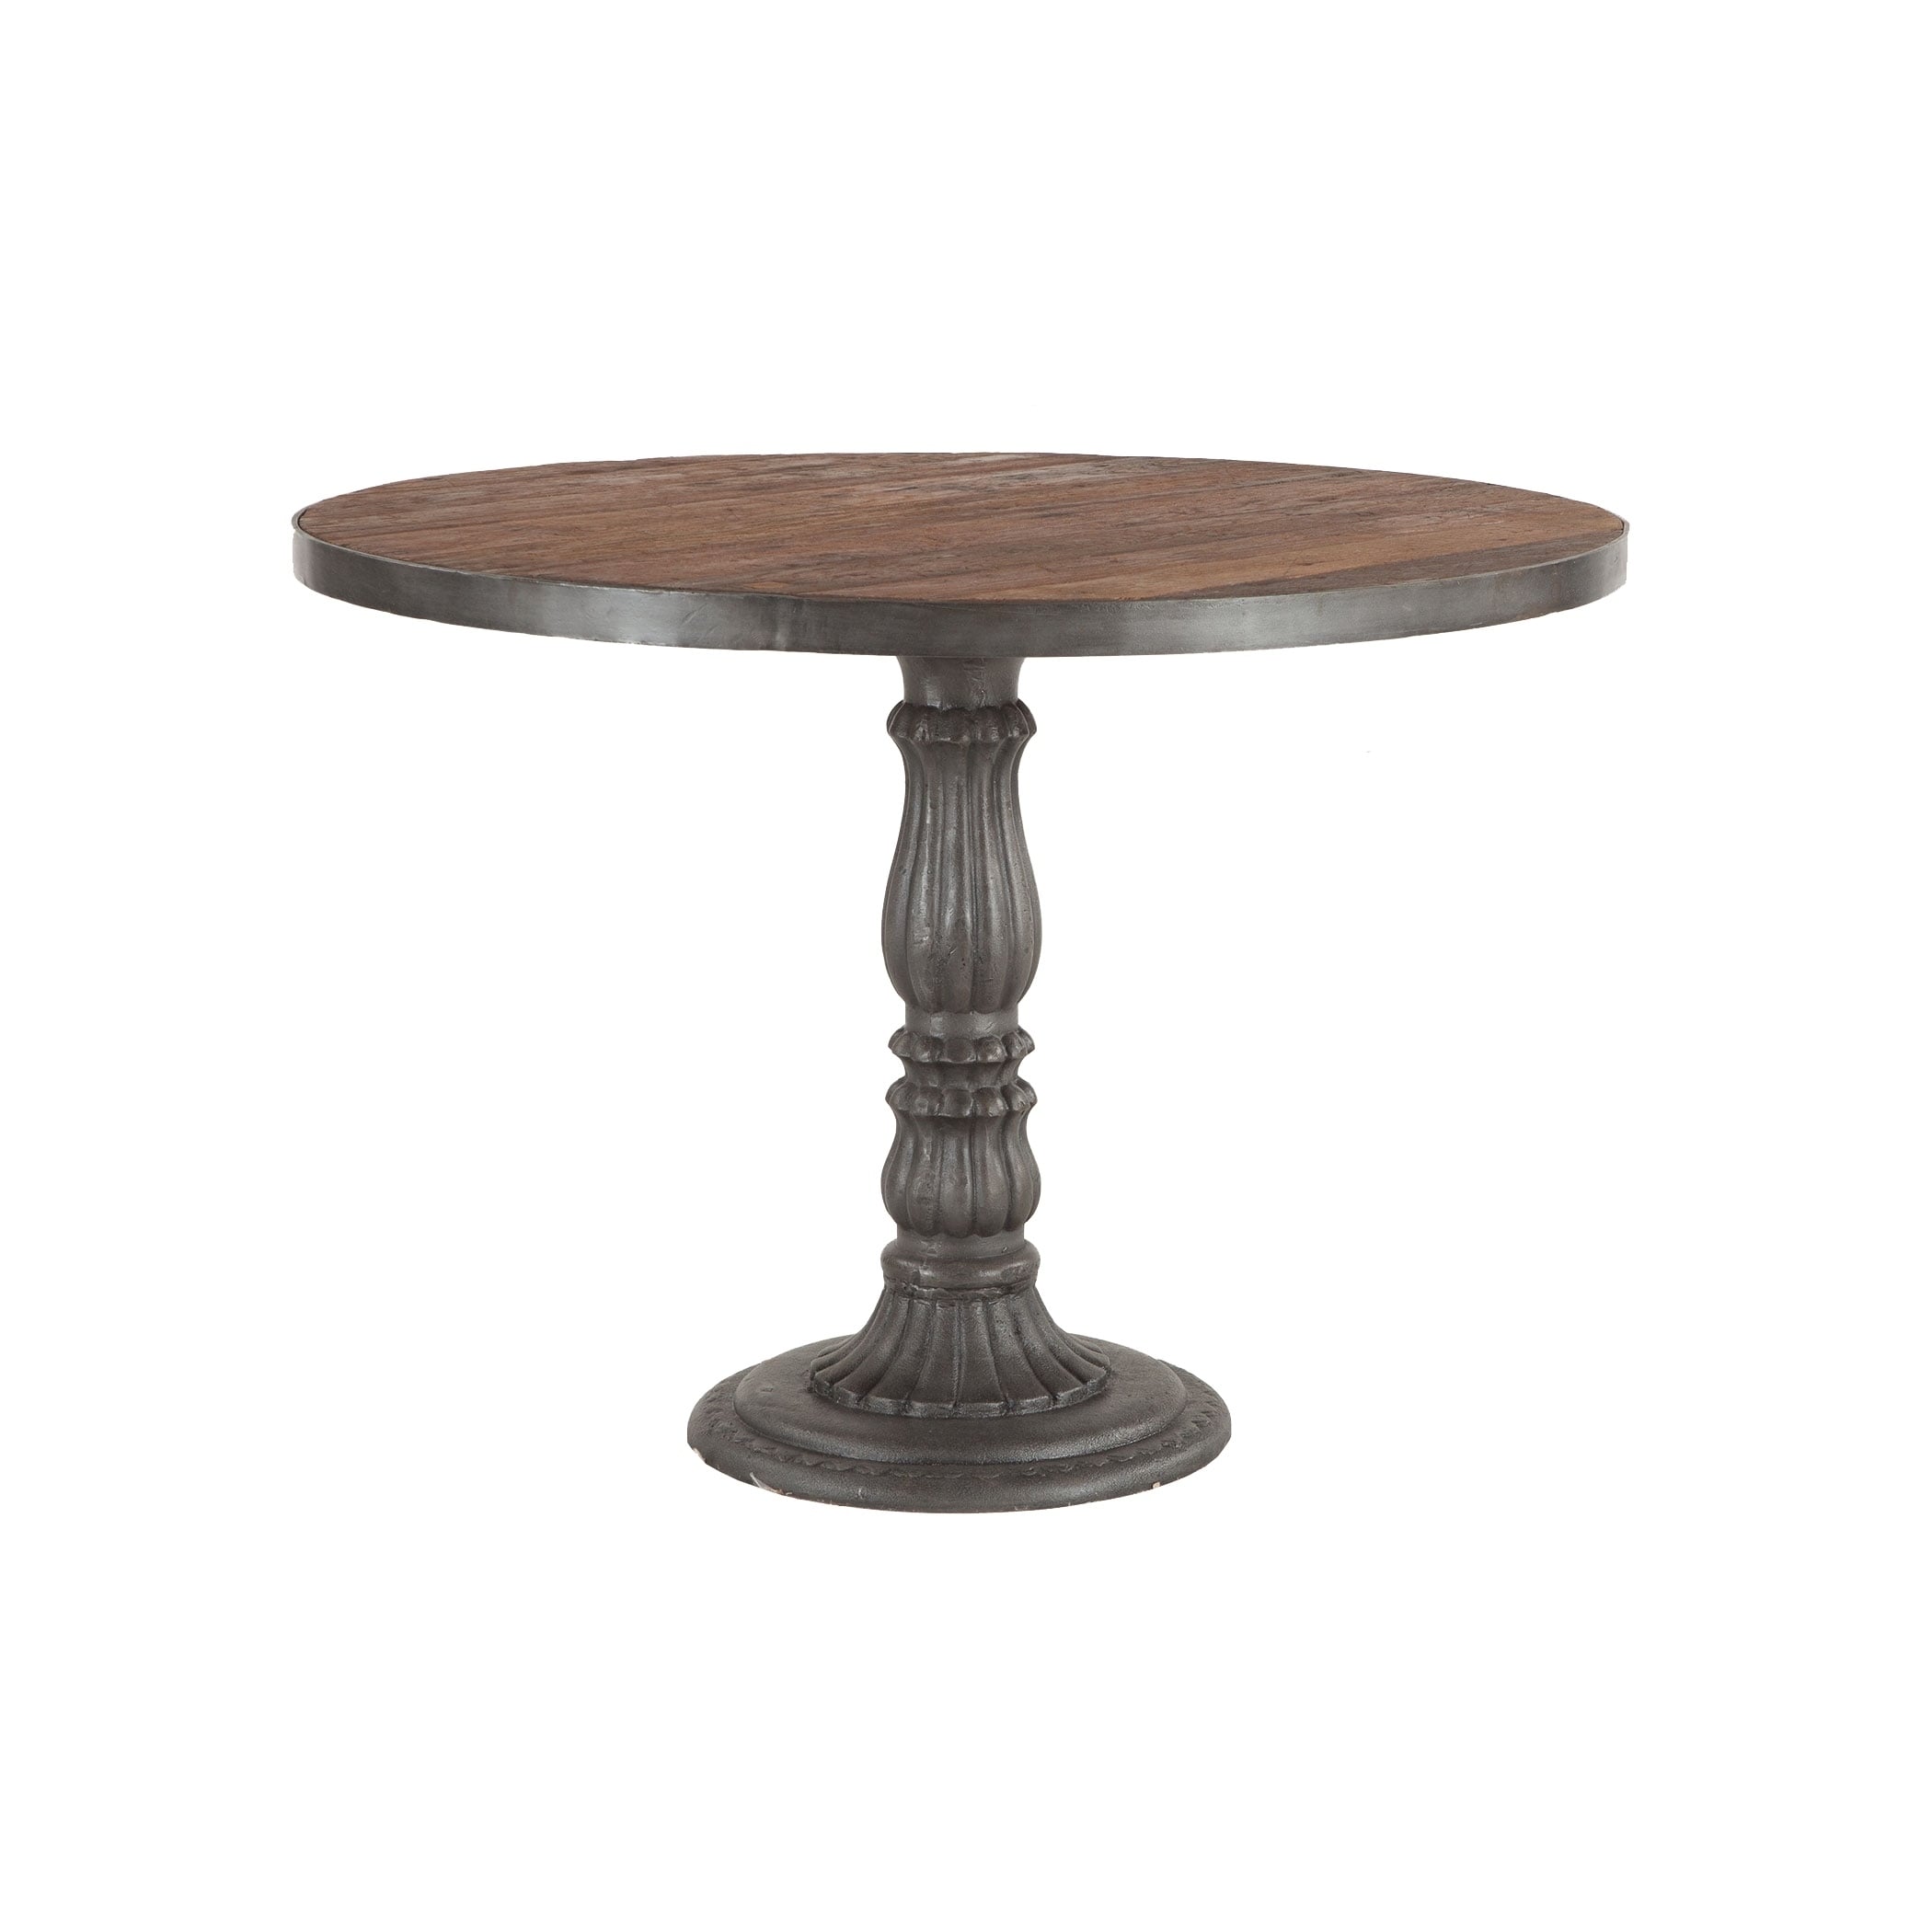 Paxton 42 Inch Round Reclaimed Teak Wood Dining Table Grey Overstock 17477801